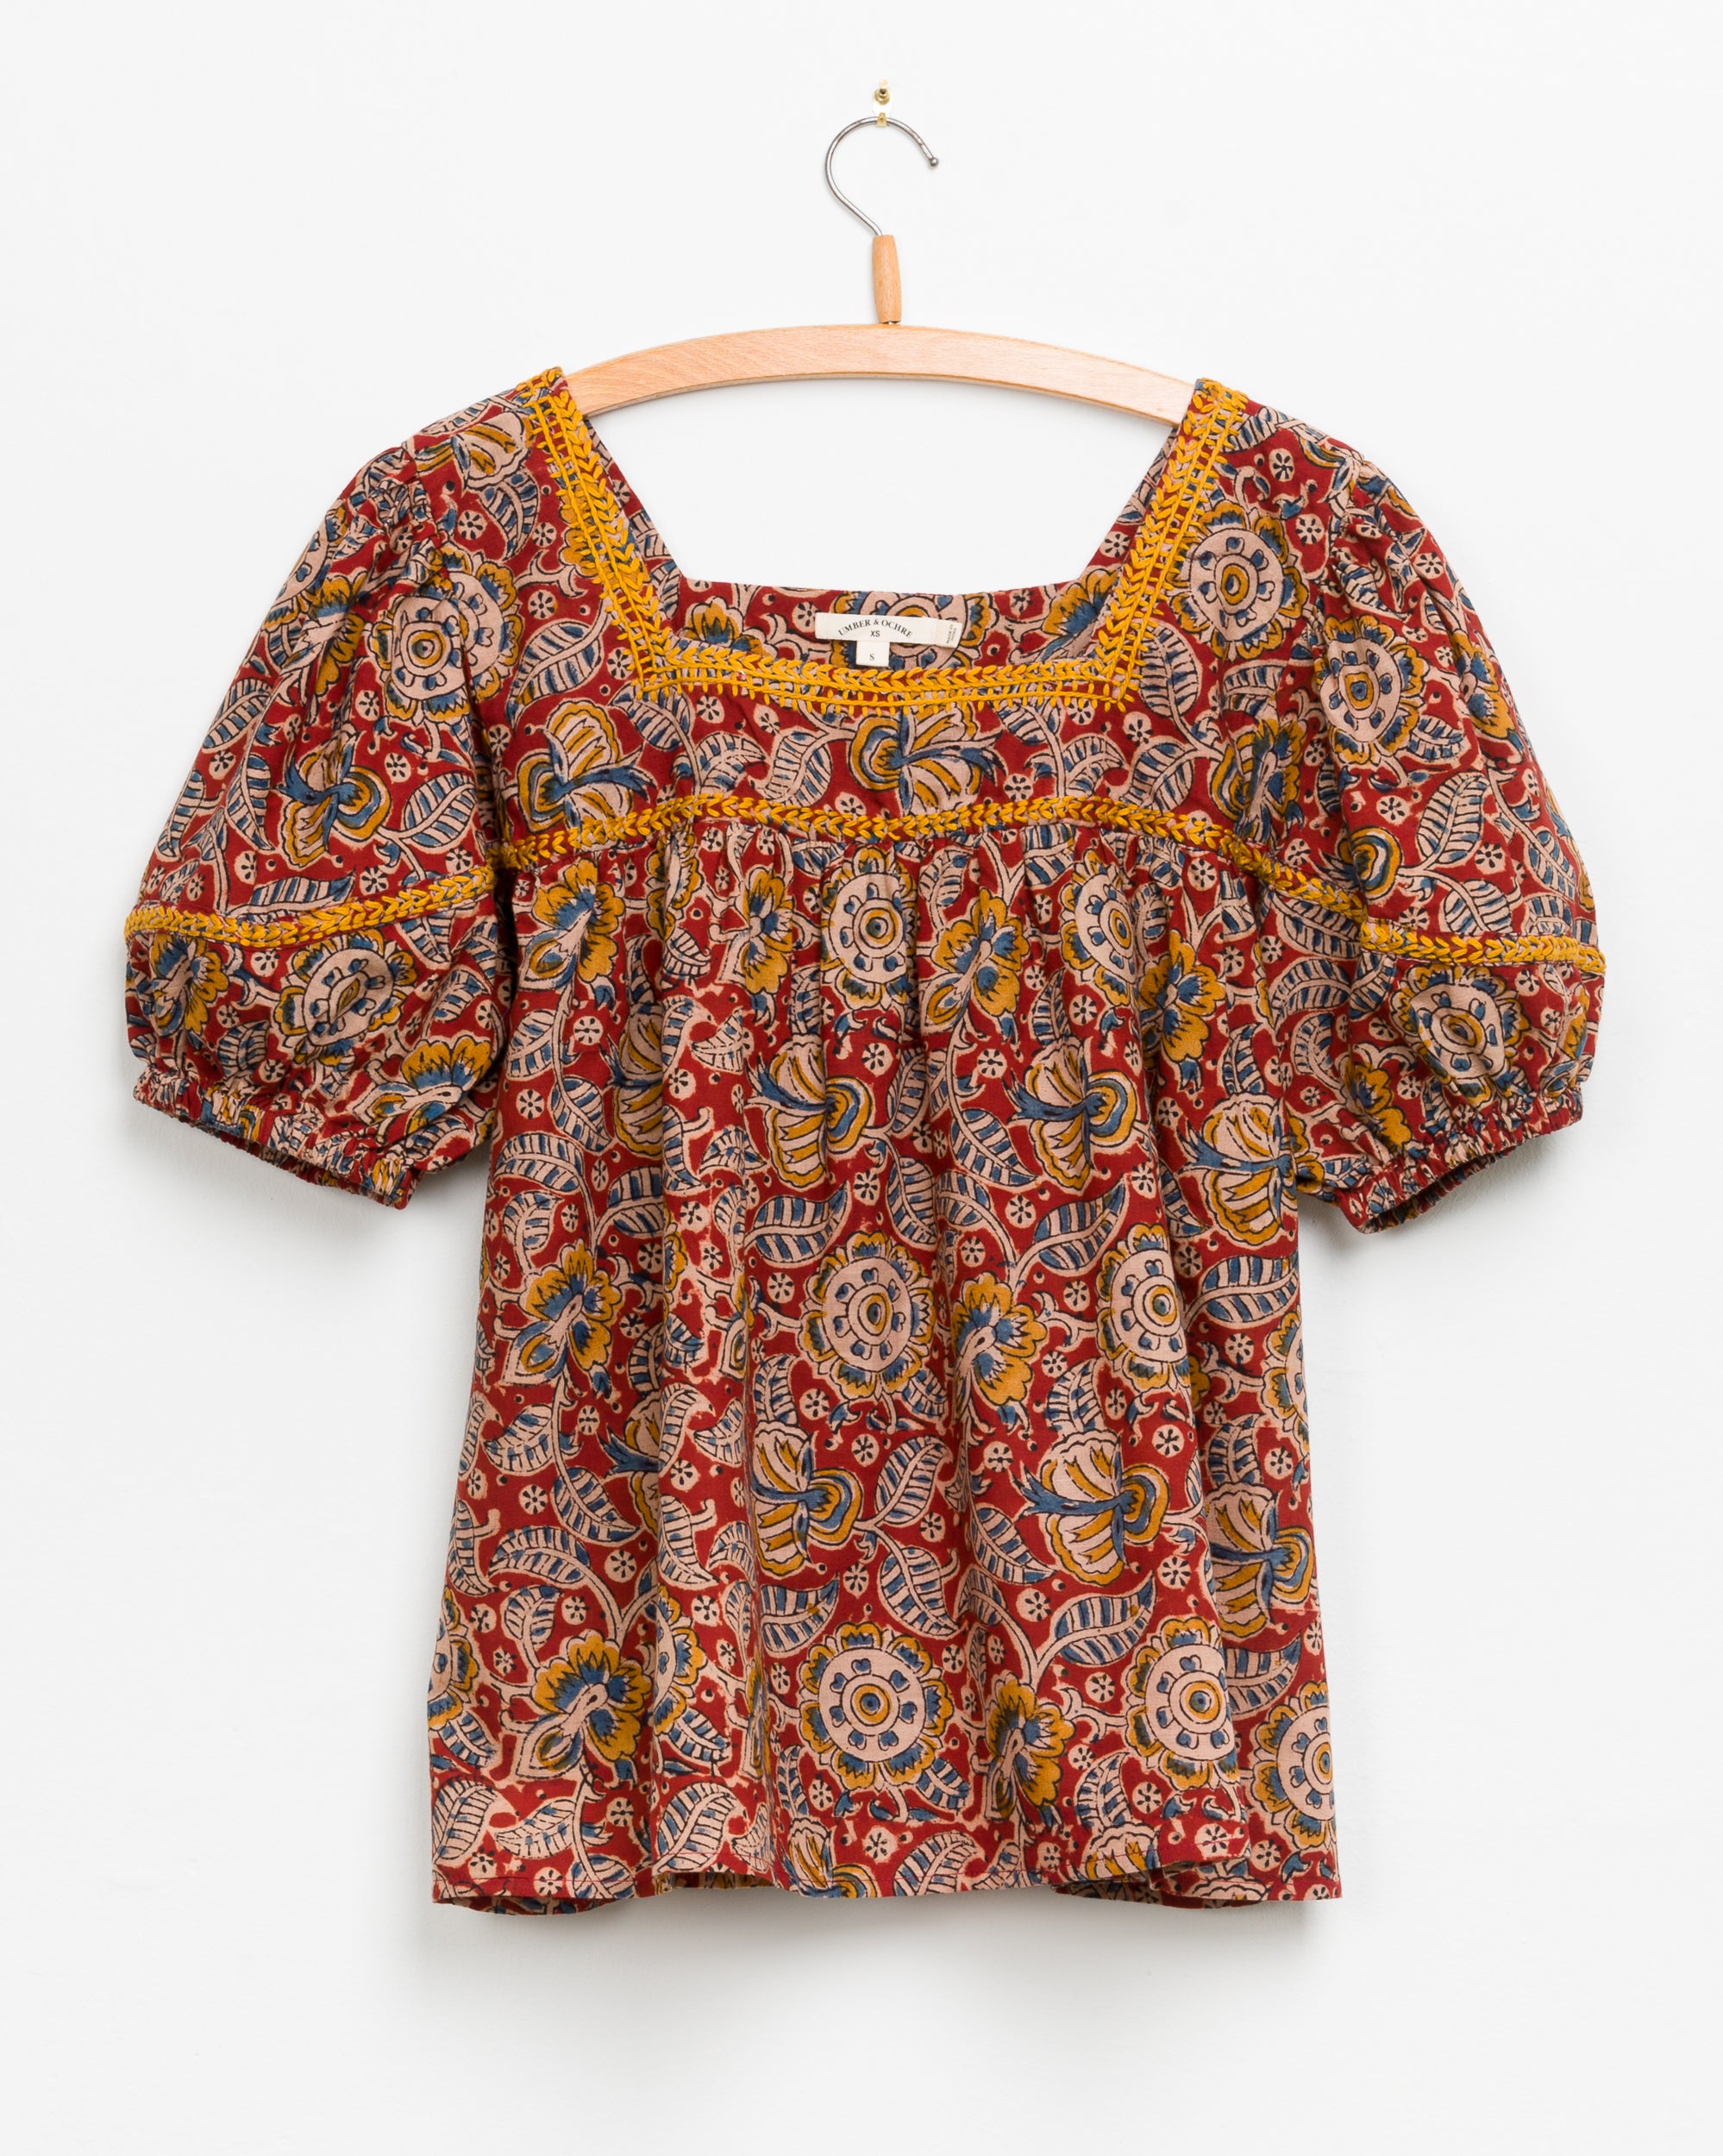 Devika S/S Peasant Top in Red Floral